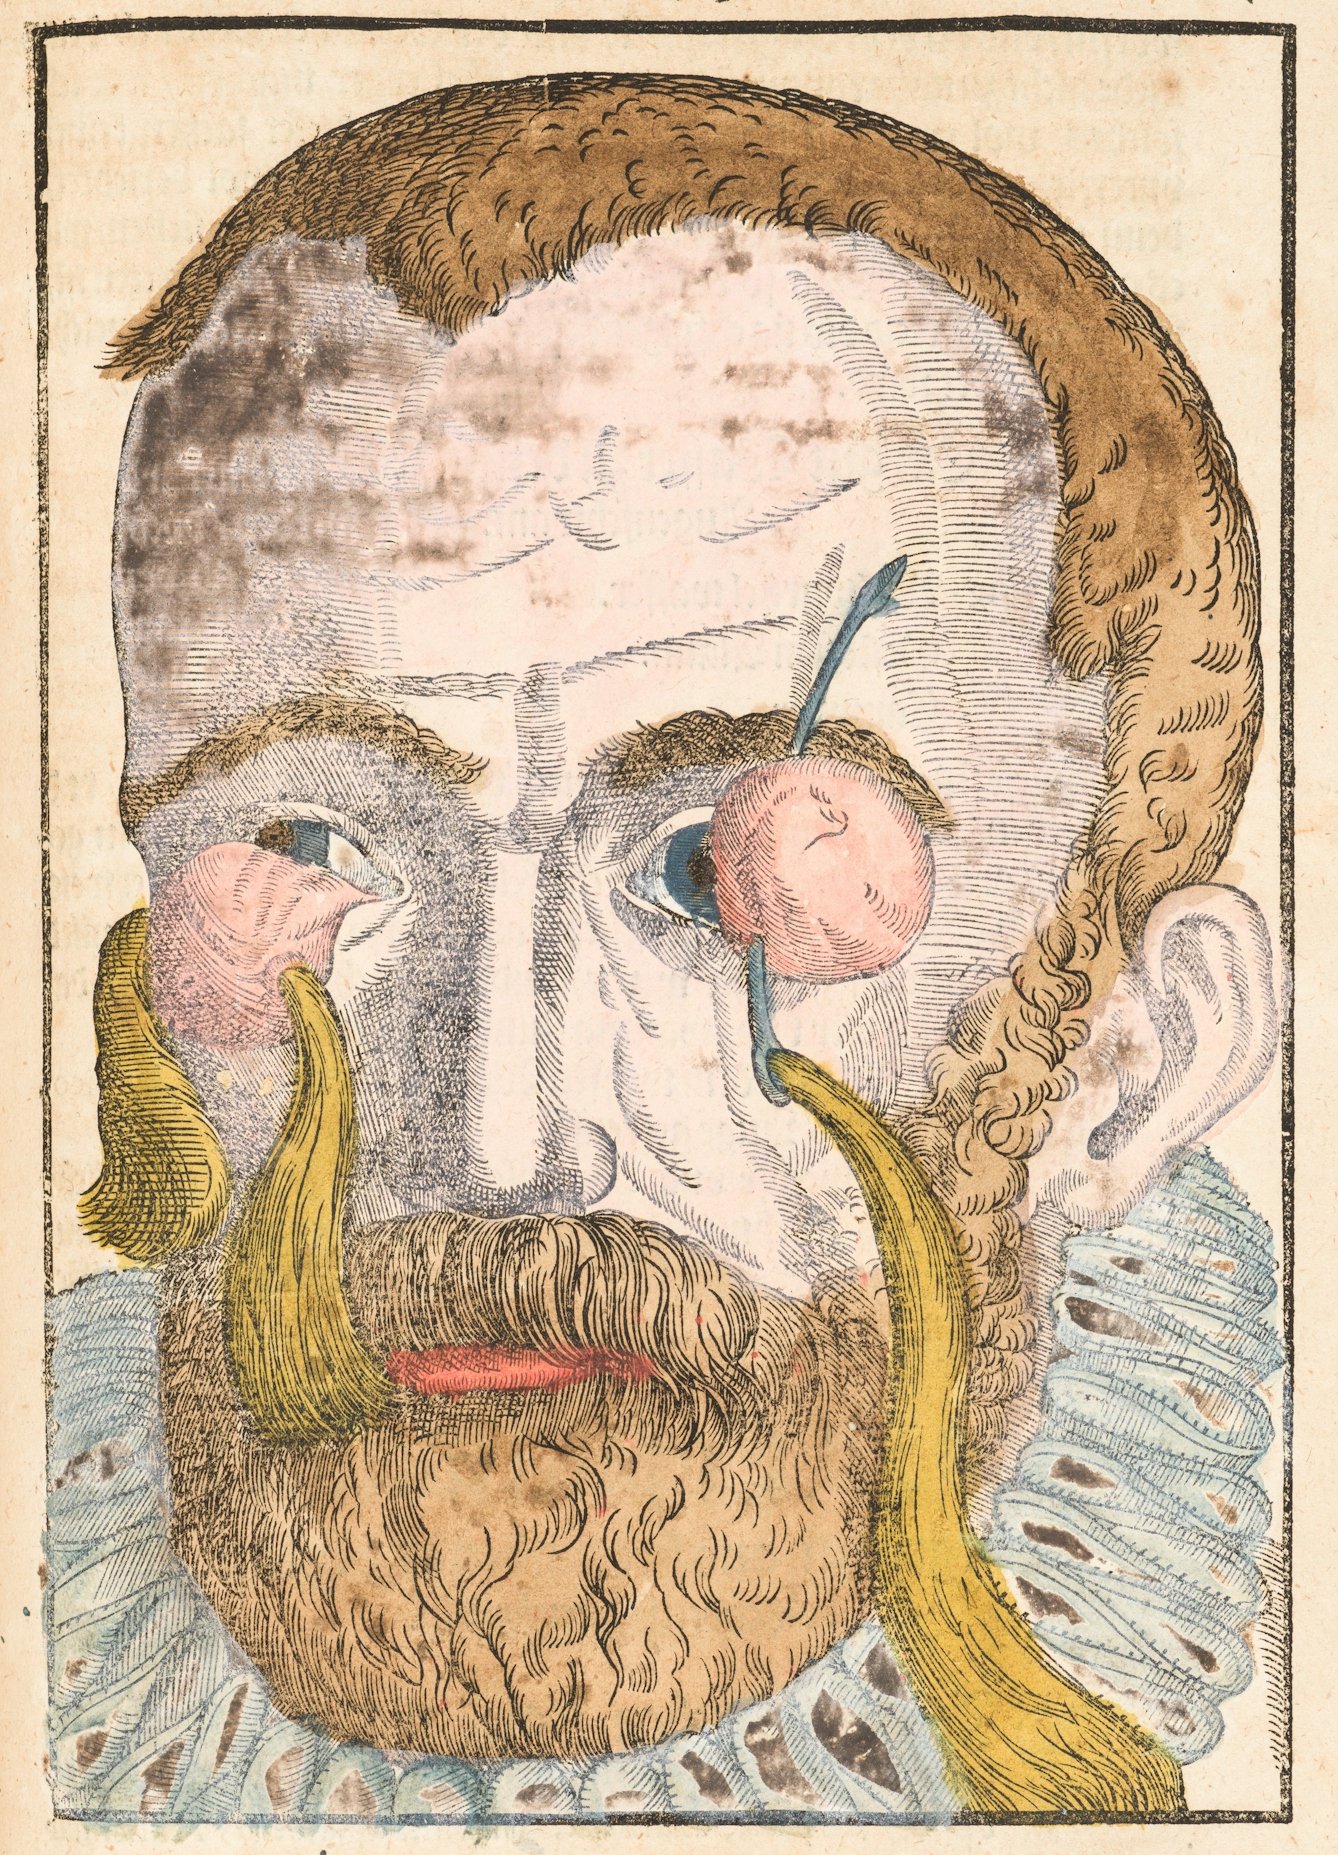 Coloured engraving from a 16th century book showing a man's head and the ruff of his clothes. His eyes are partially covered by two pink shapes, one of which has strands of hair running through the centre, the other has a needle running through the middle which is attached to stands of hair.